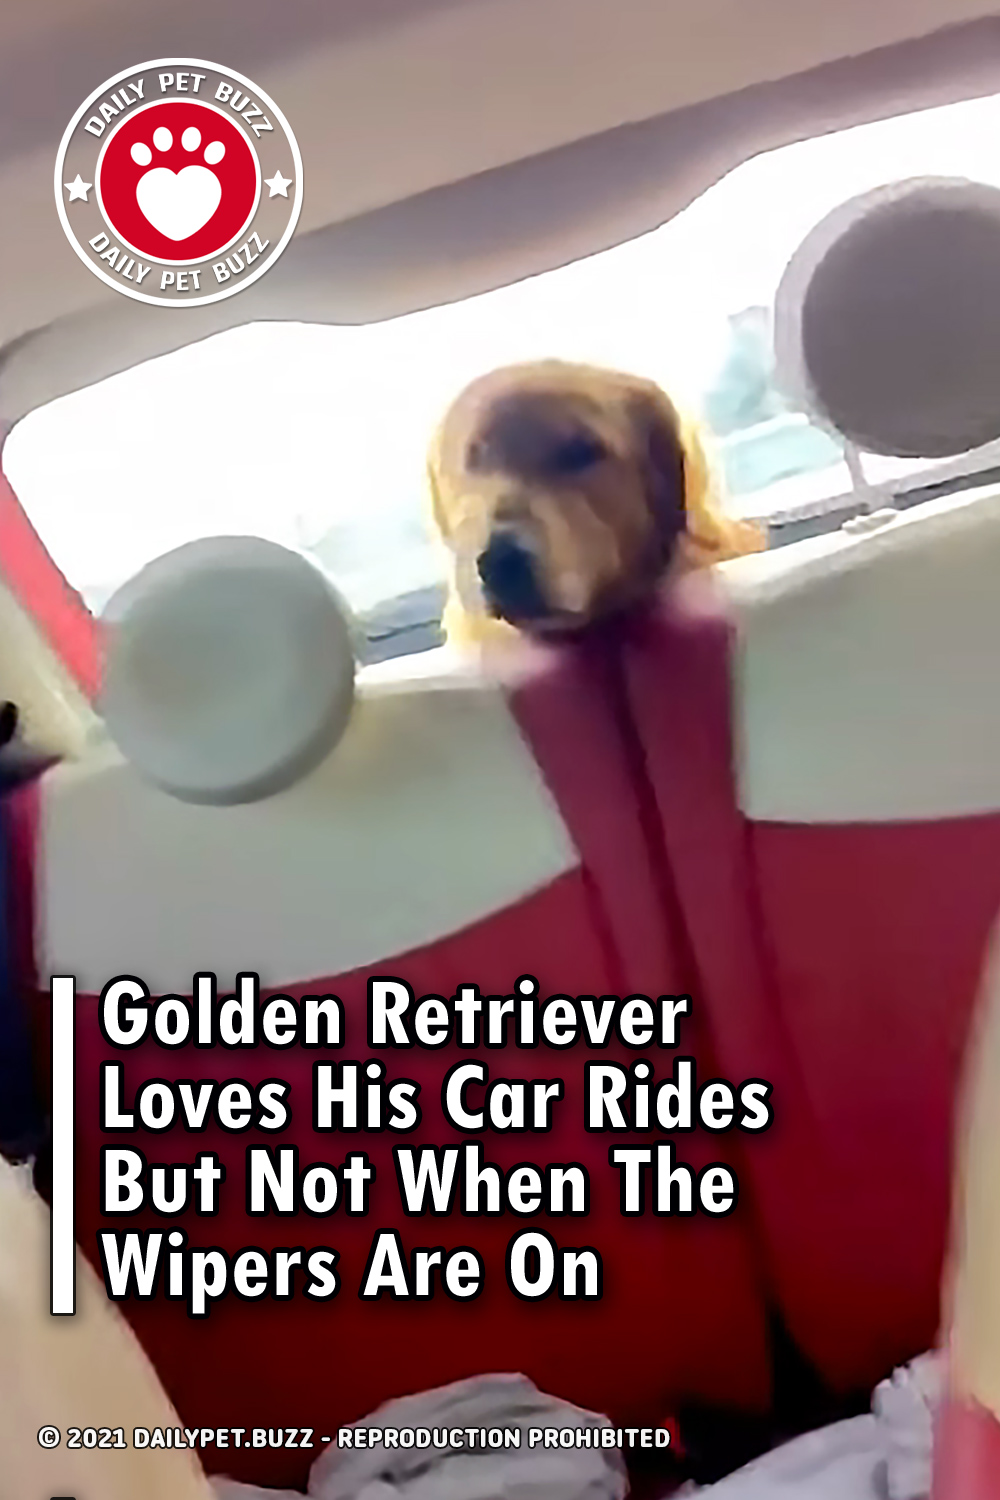 Golden Retriever Loves His Car Rides But Not When The Wipers Are On